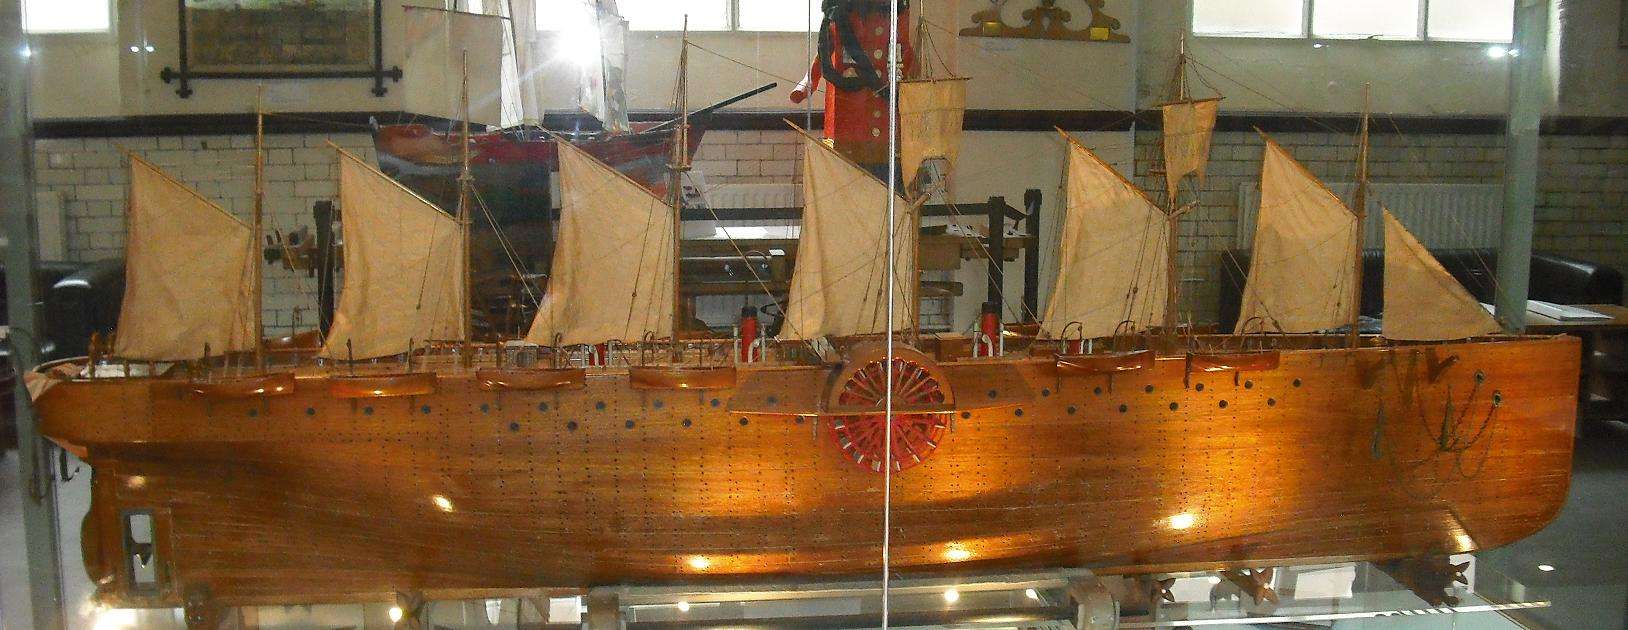 Pullen's model of SS Great Eastern displayed at the Langdon Down Museum